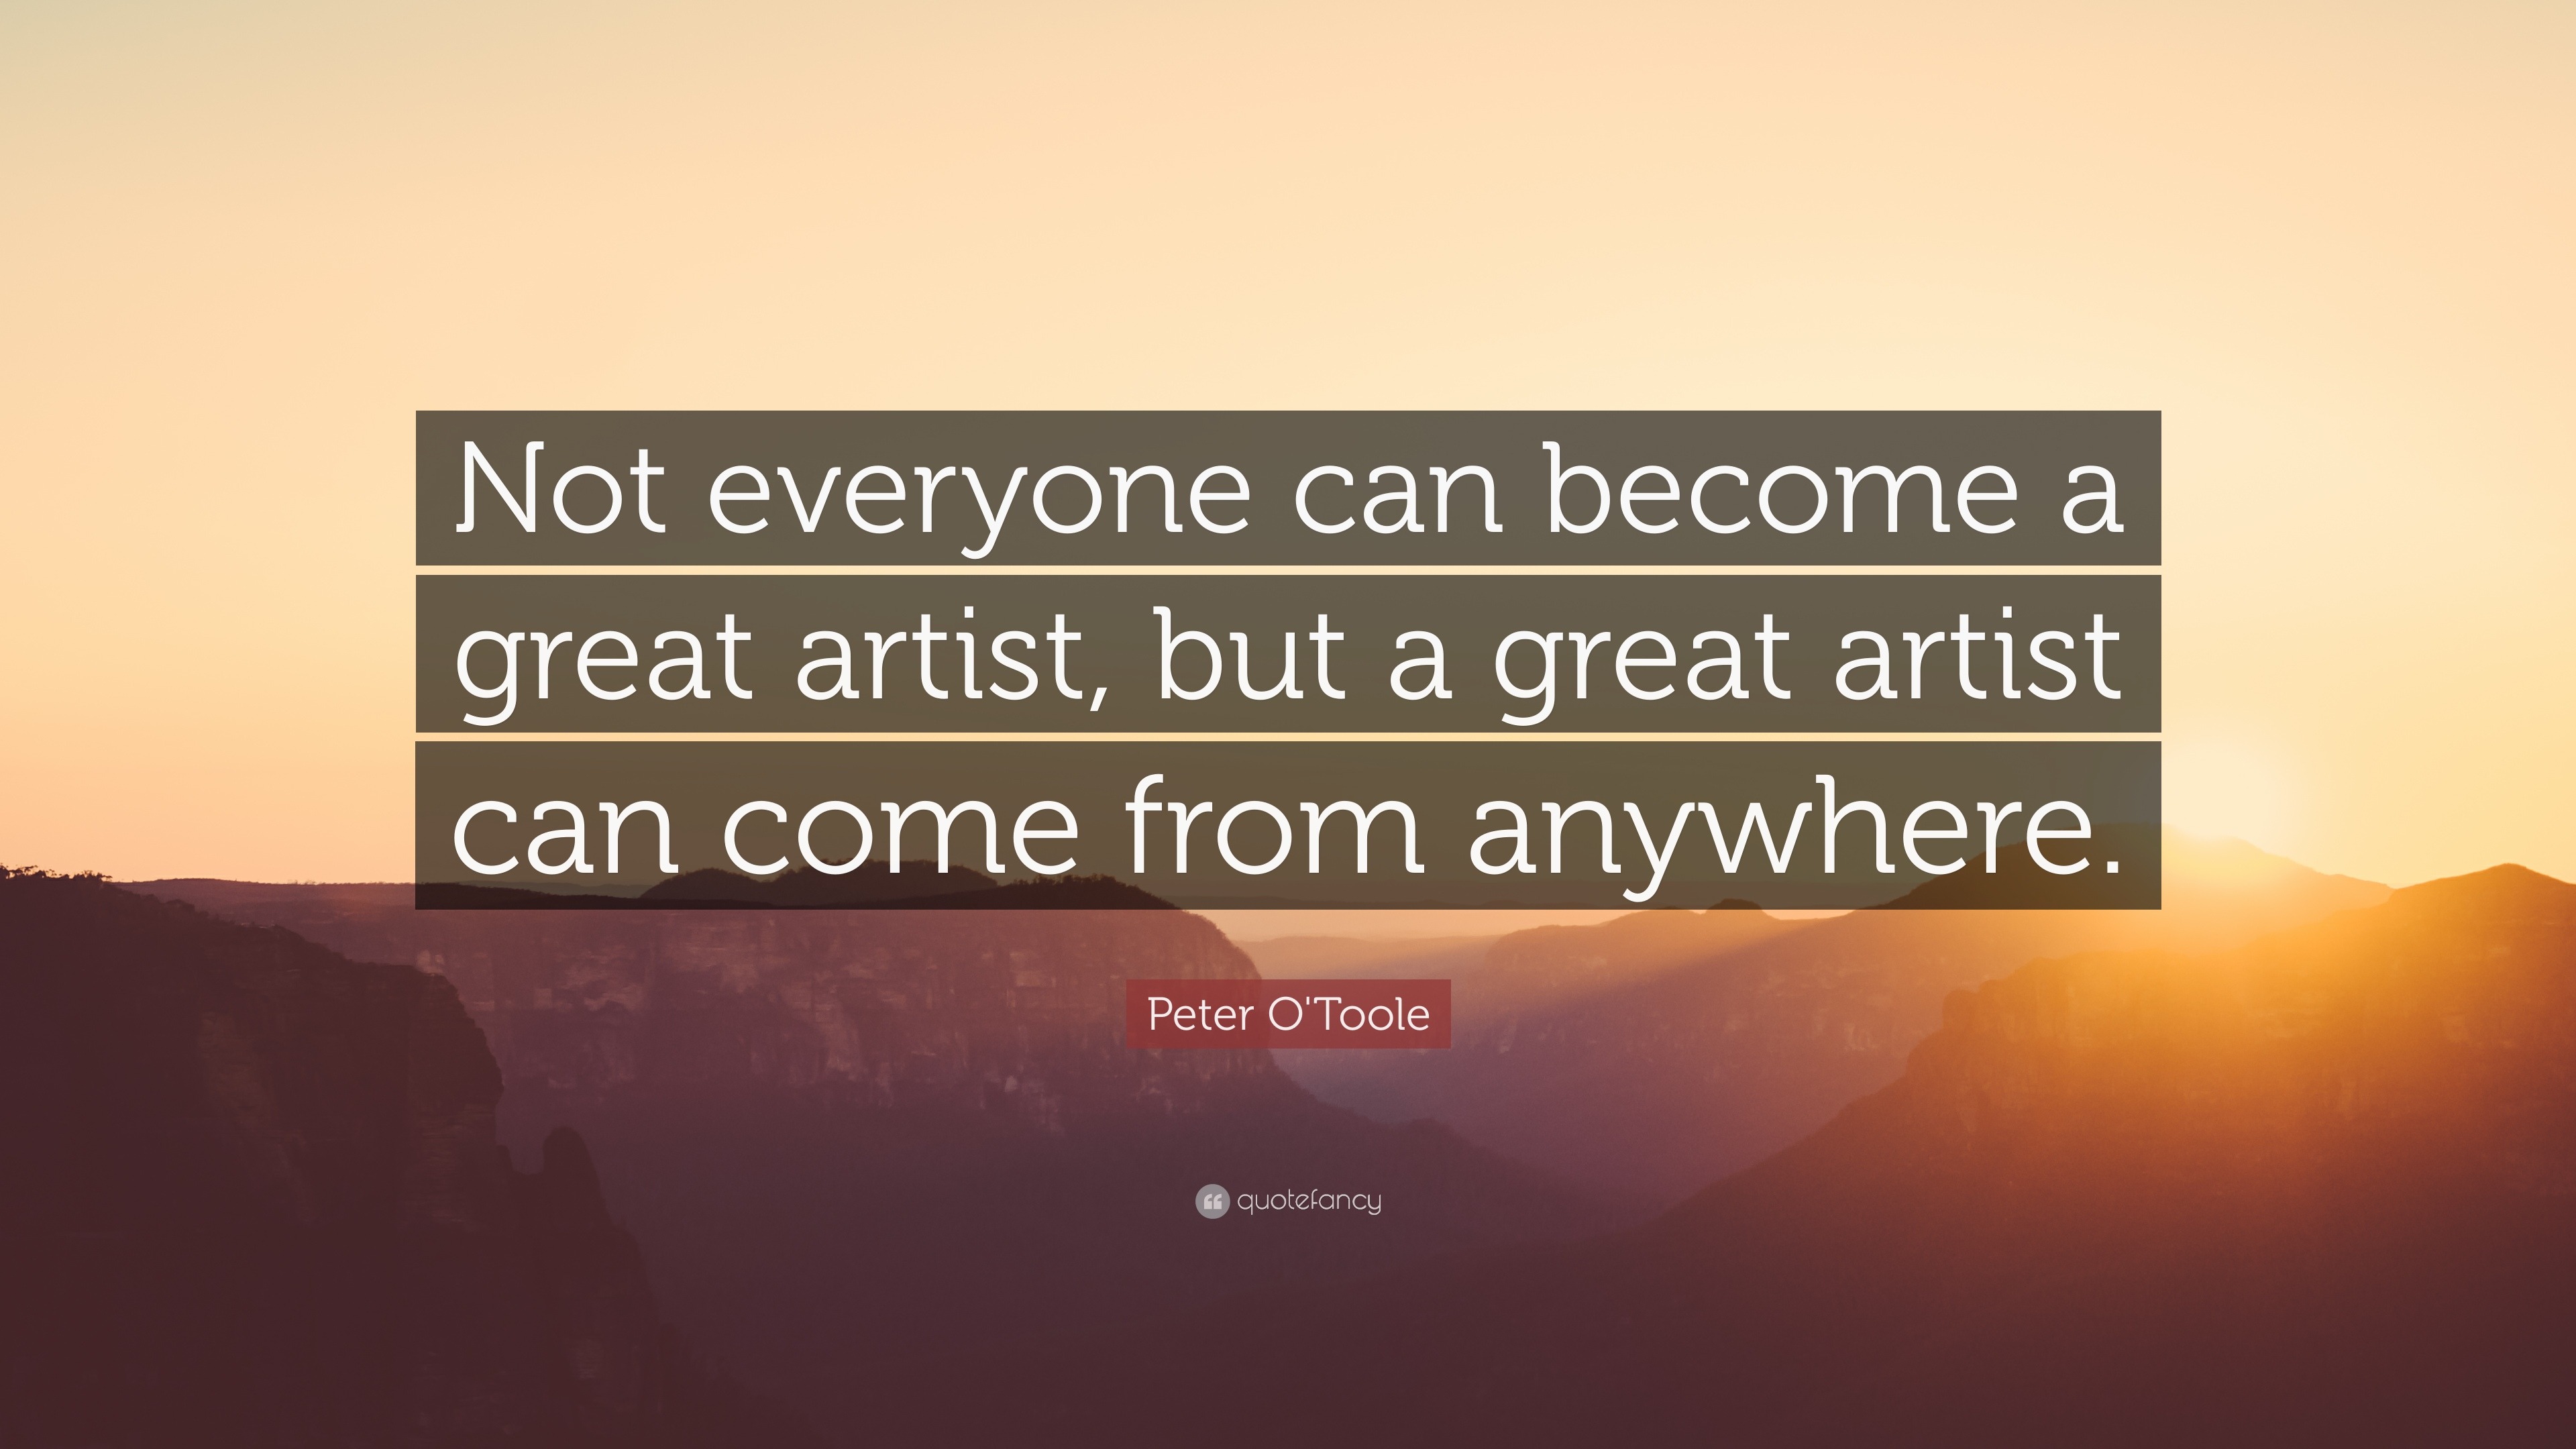 Peter O'Toole Quote: “Not everyone can become a great artist, but a